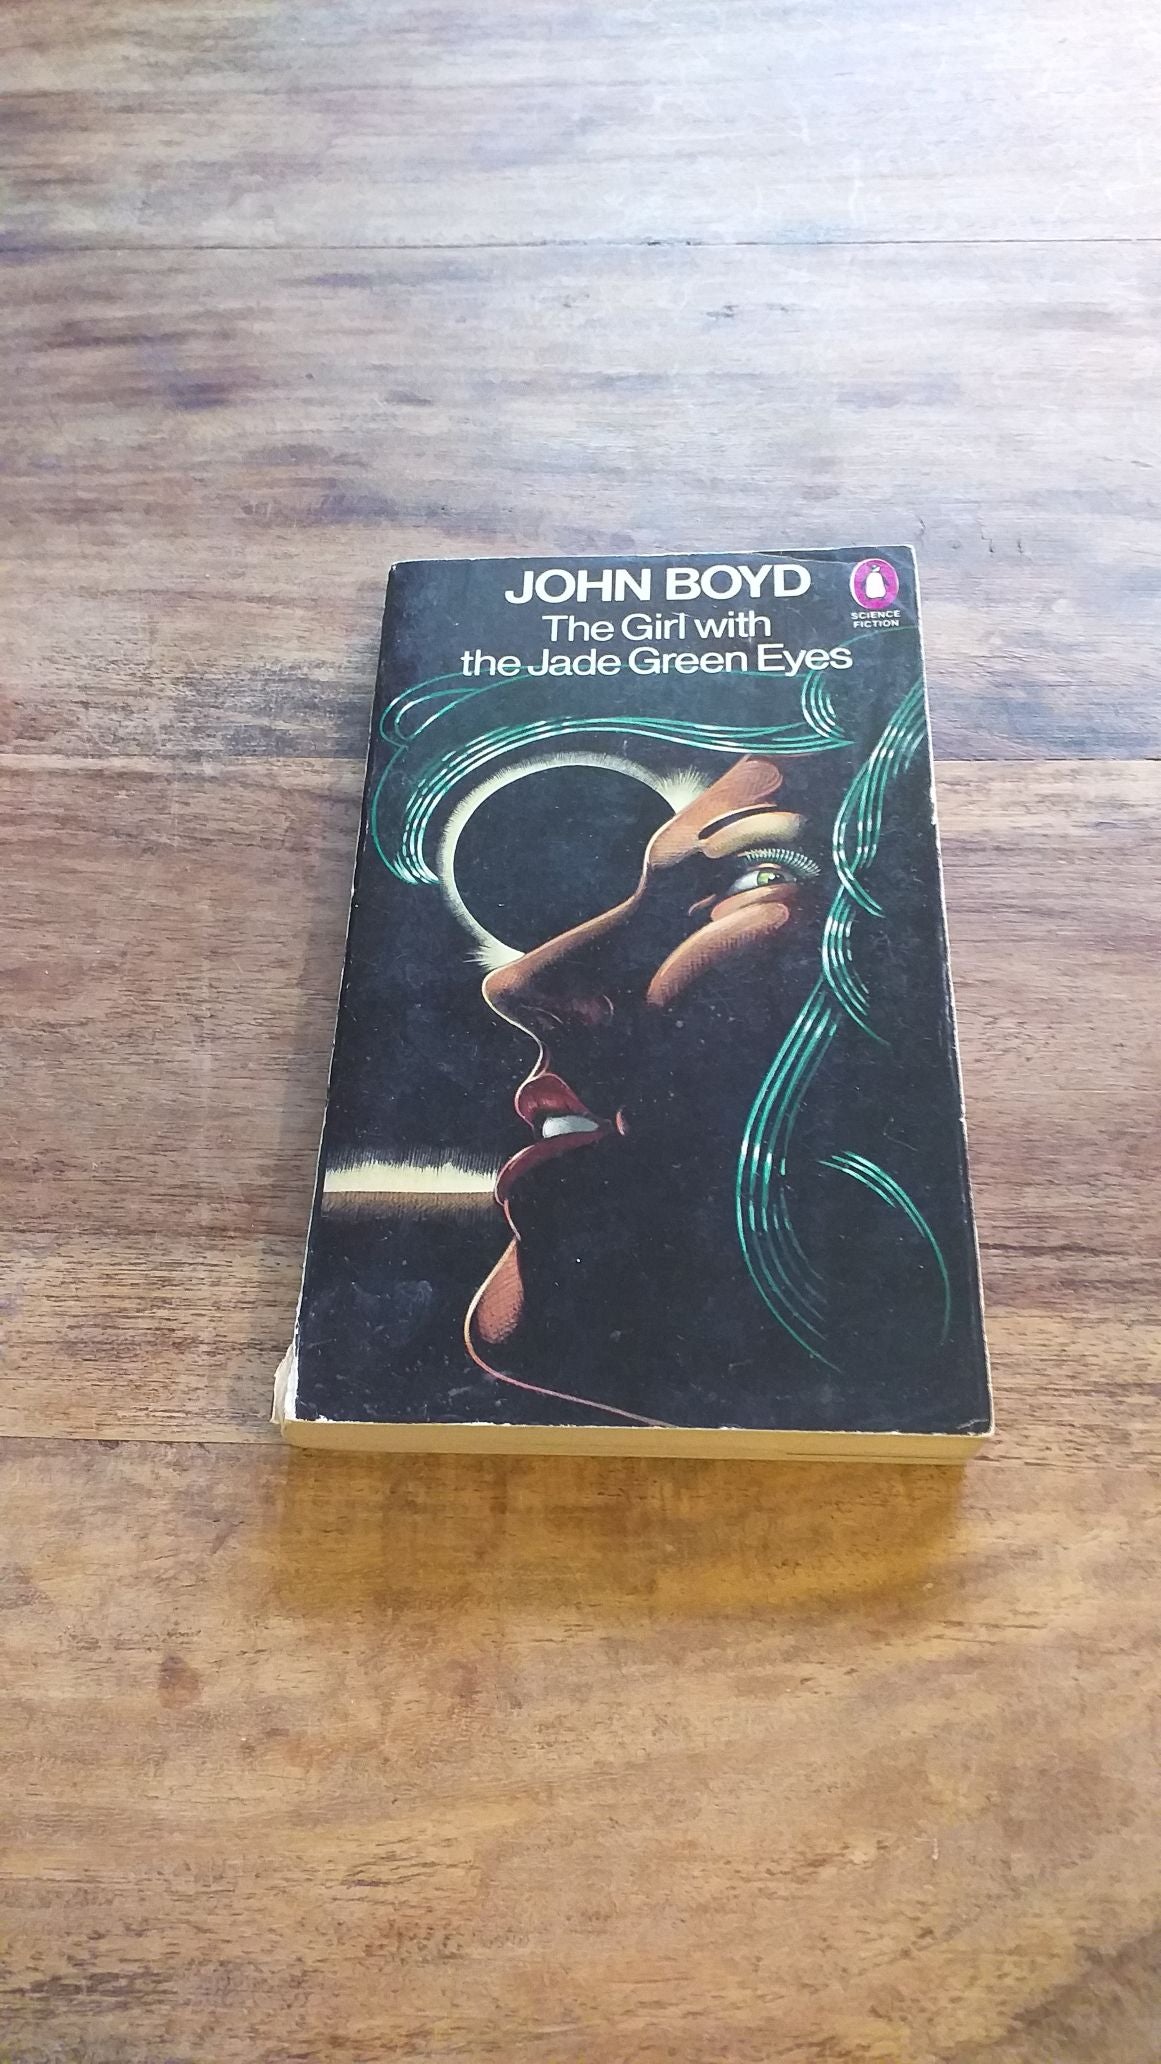 The Girl with the Jade Green Eyes by John Boyd 1979 UK Penguin Vintage